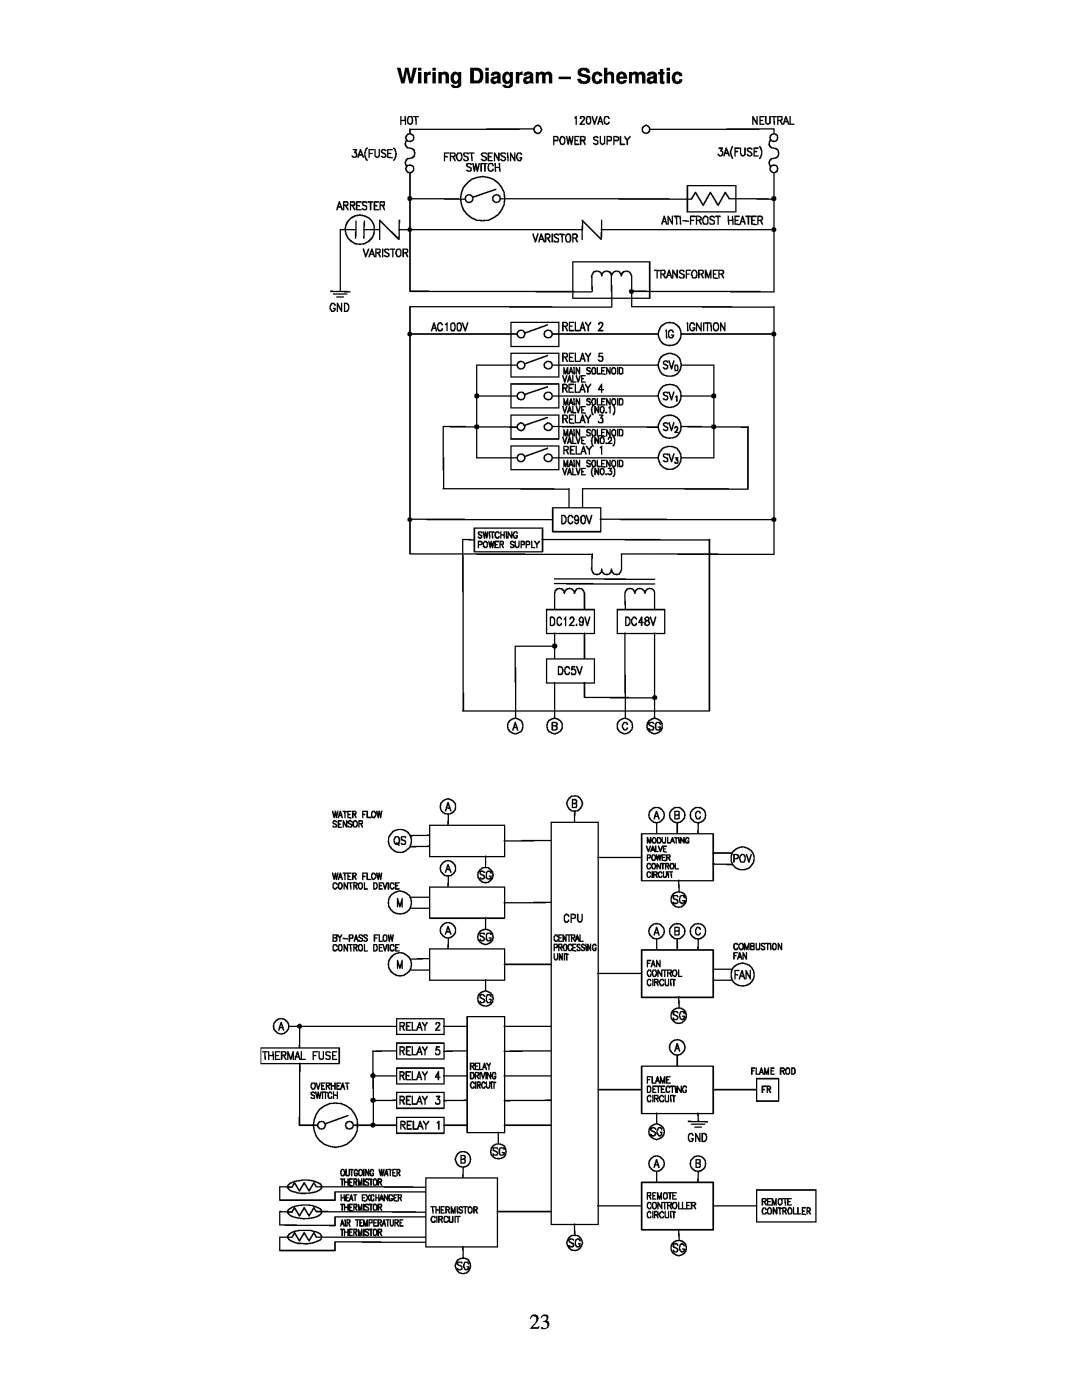 Bradford-White Corp IGE-199C Series, IGE-199R Series instruction manual Wiring Diagram - Schematic 